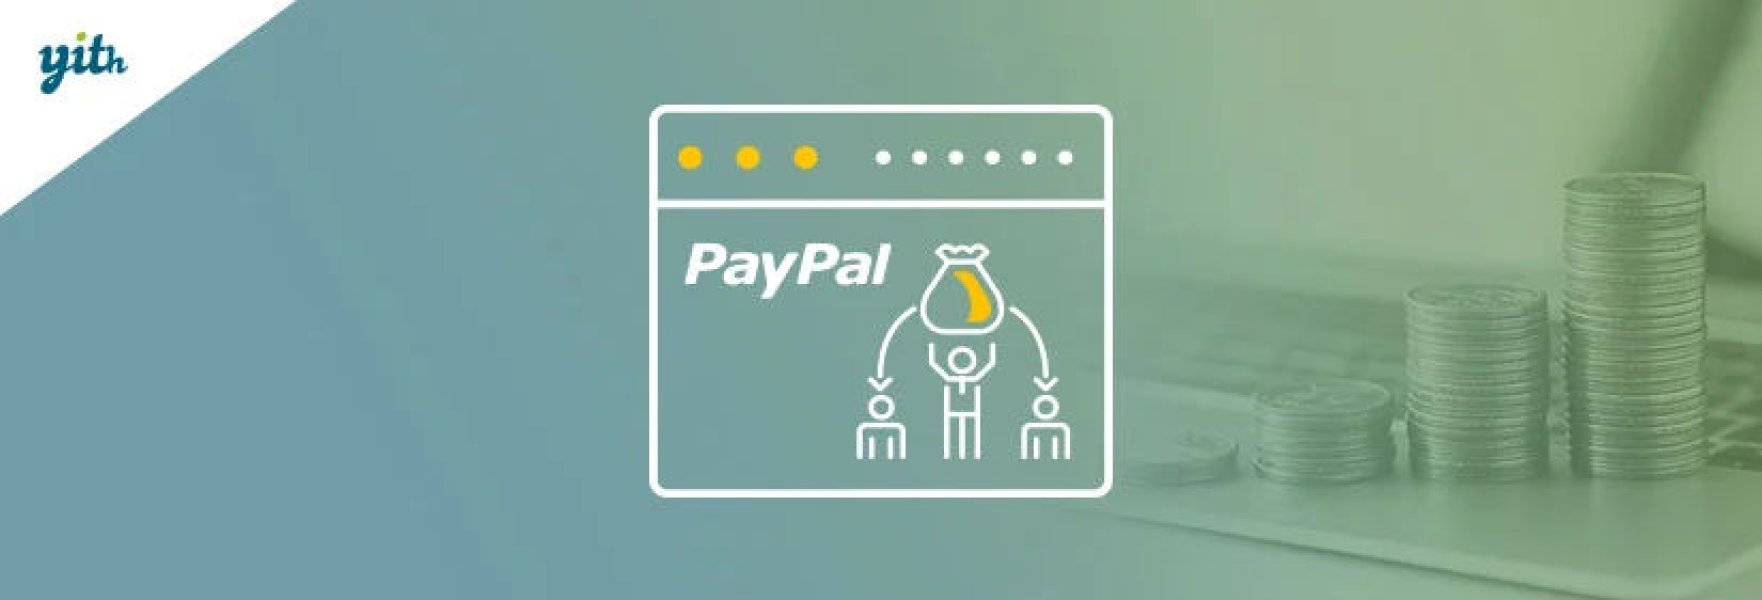 YITH PayPal Payouts For Woocommerce